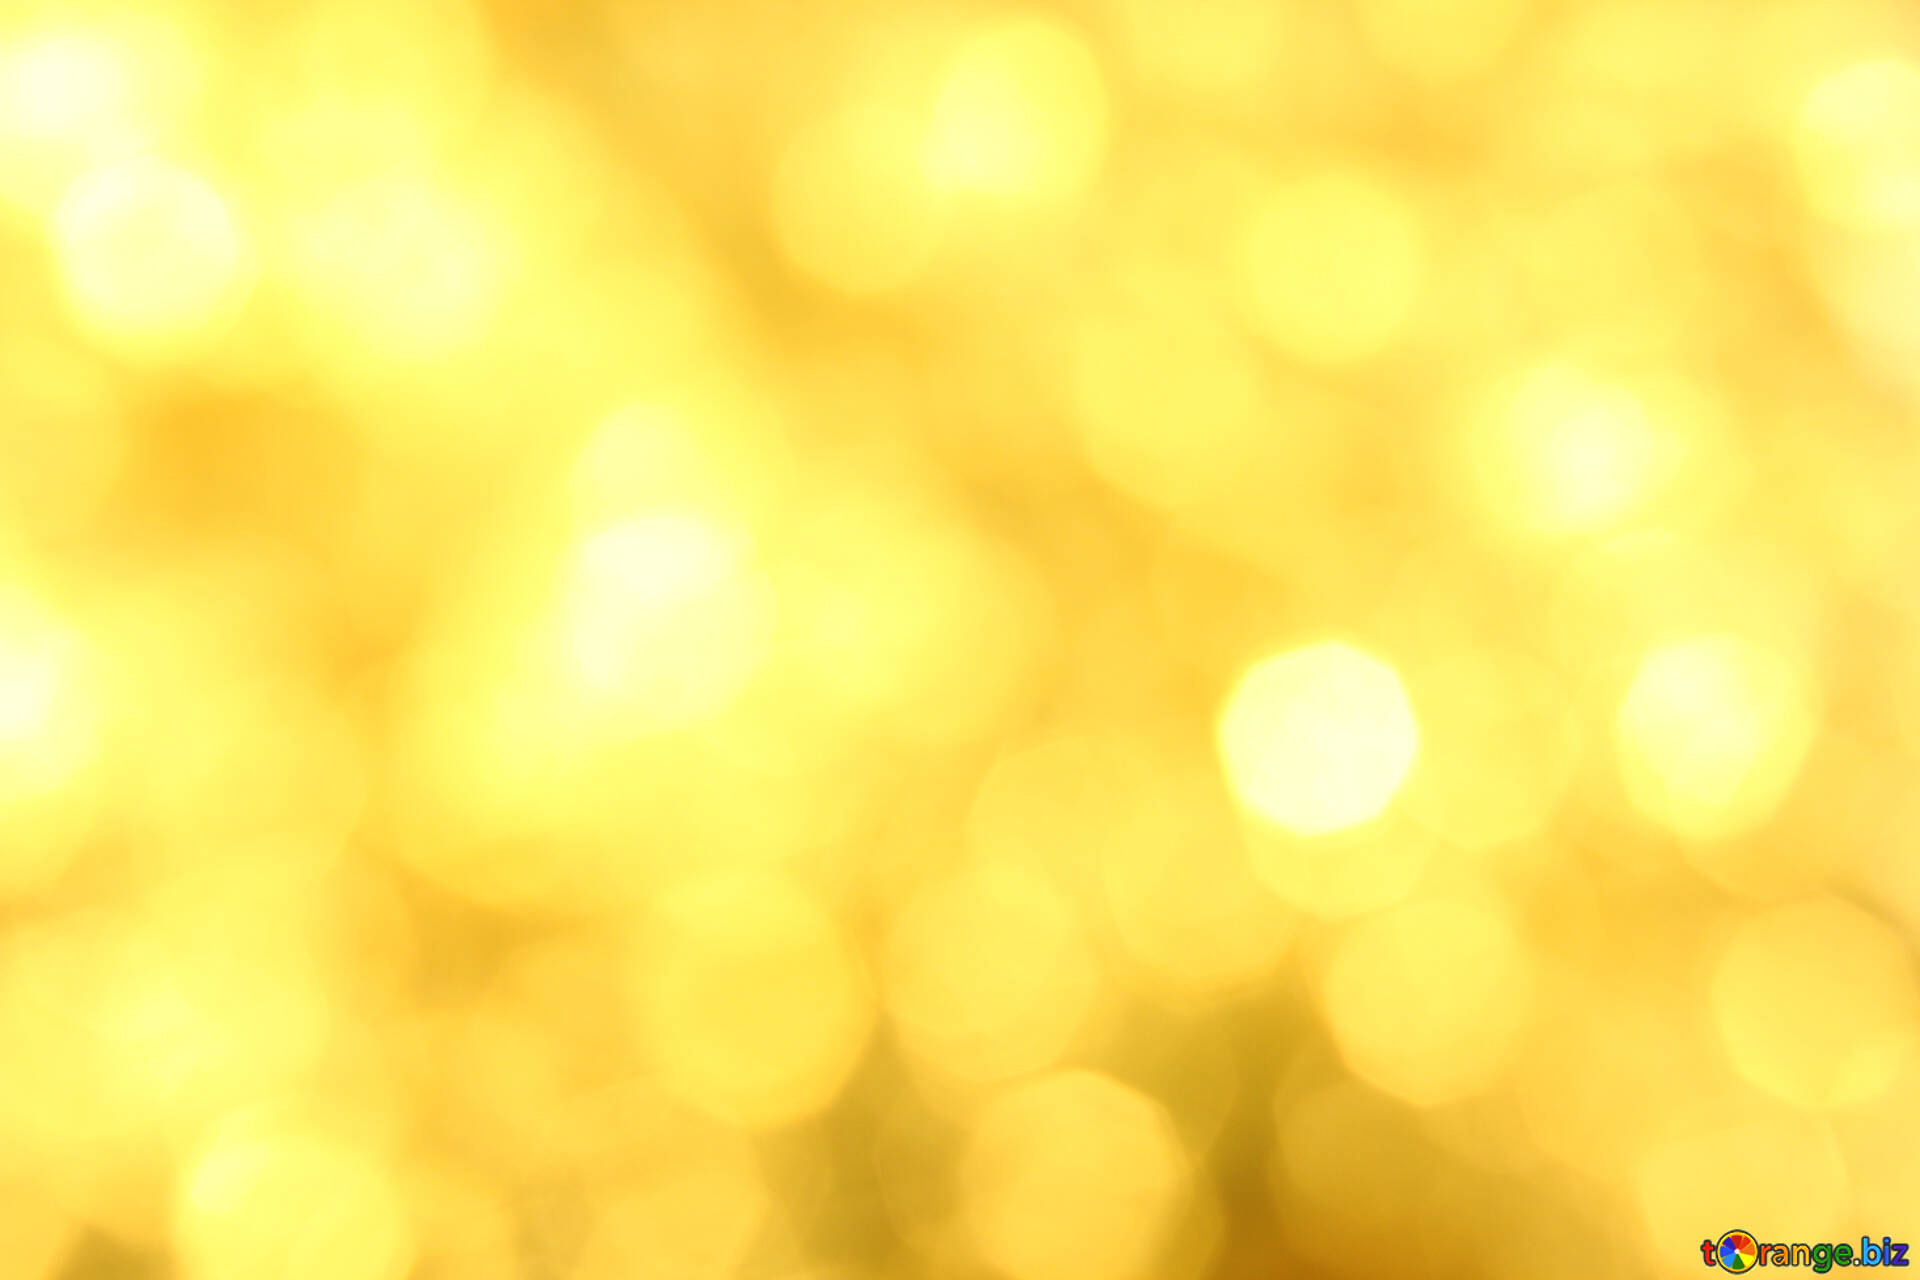 Gold backgrounds image gold background images gold № 37815  ~  free pics on cc-by license